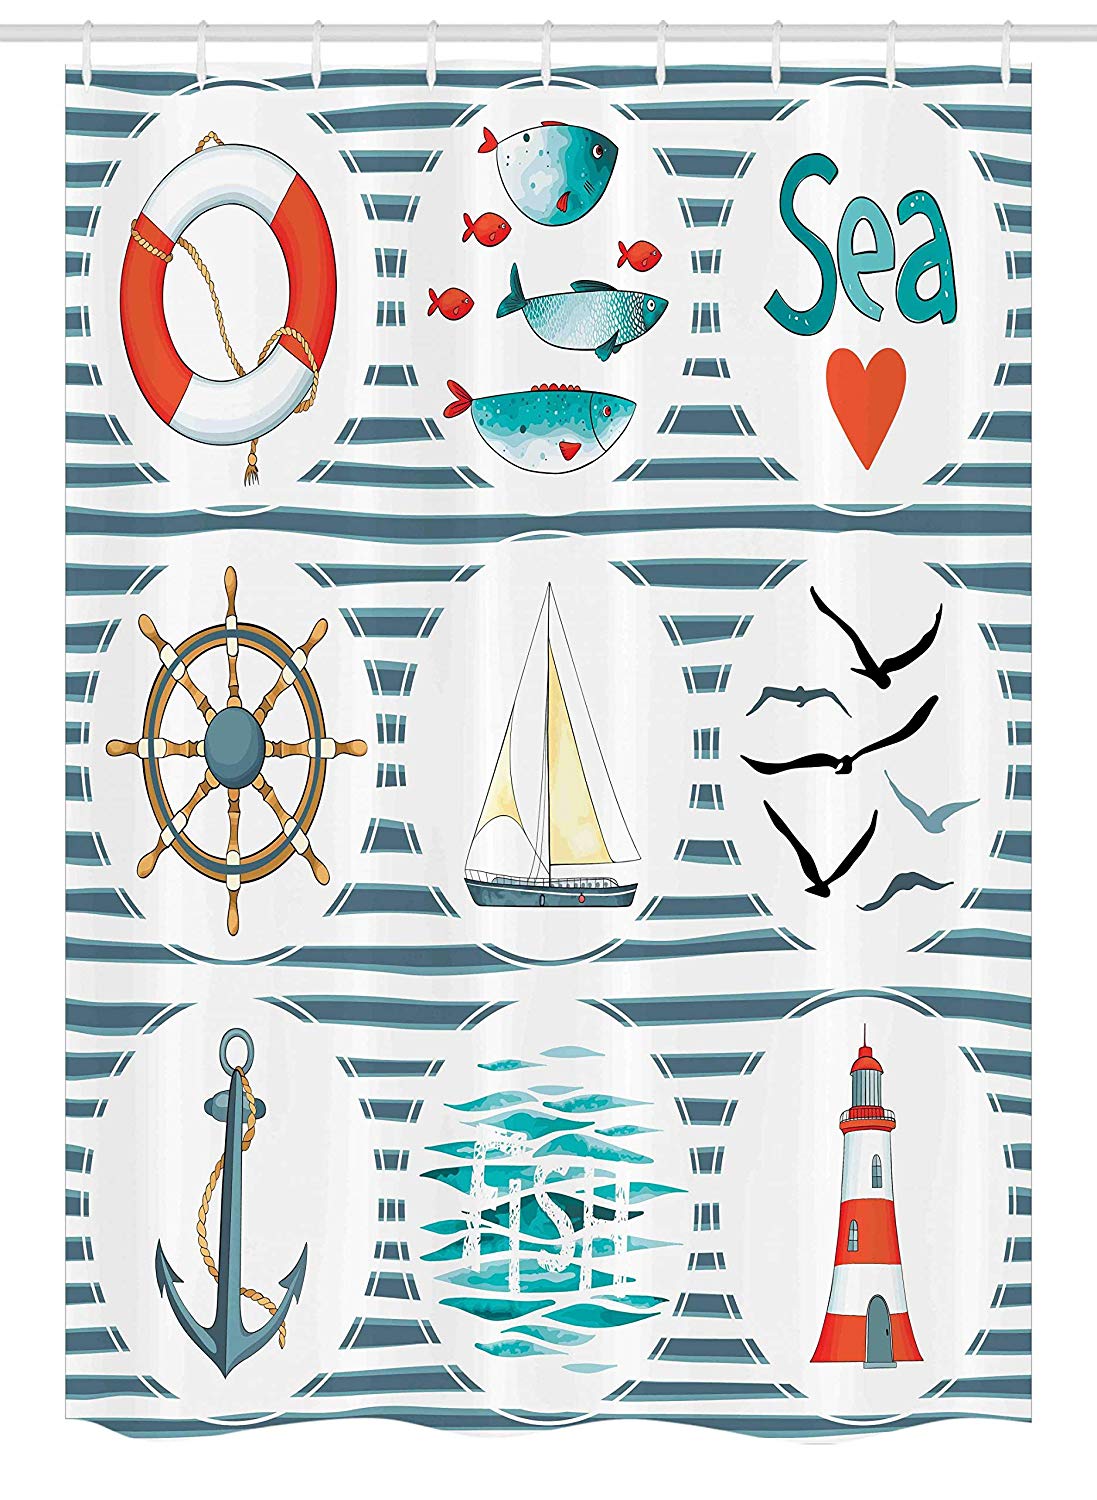 Ambesonne Nautical Stall Shower Curtain, Sea Set with Fishes Lifebuoy Gulls Lighthouse Marine Inspired Maritime Theme, Fabric Bathroom Decor Set with Hooks, 54 W x 78 L Inches, White Red Blue